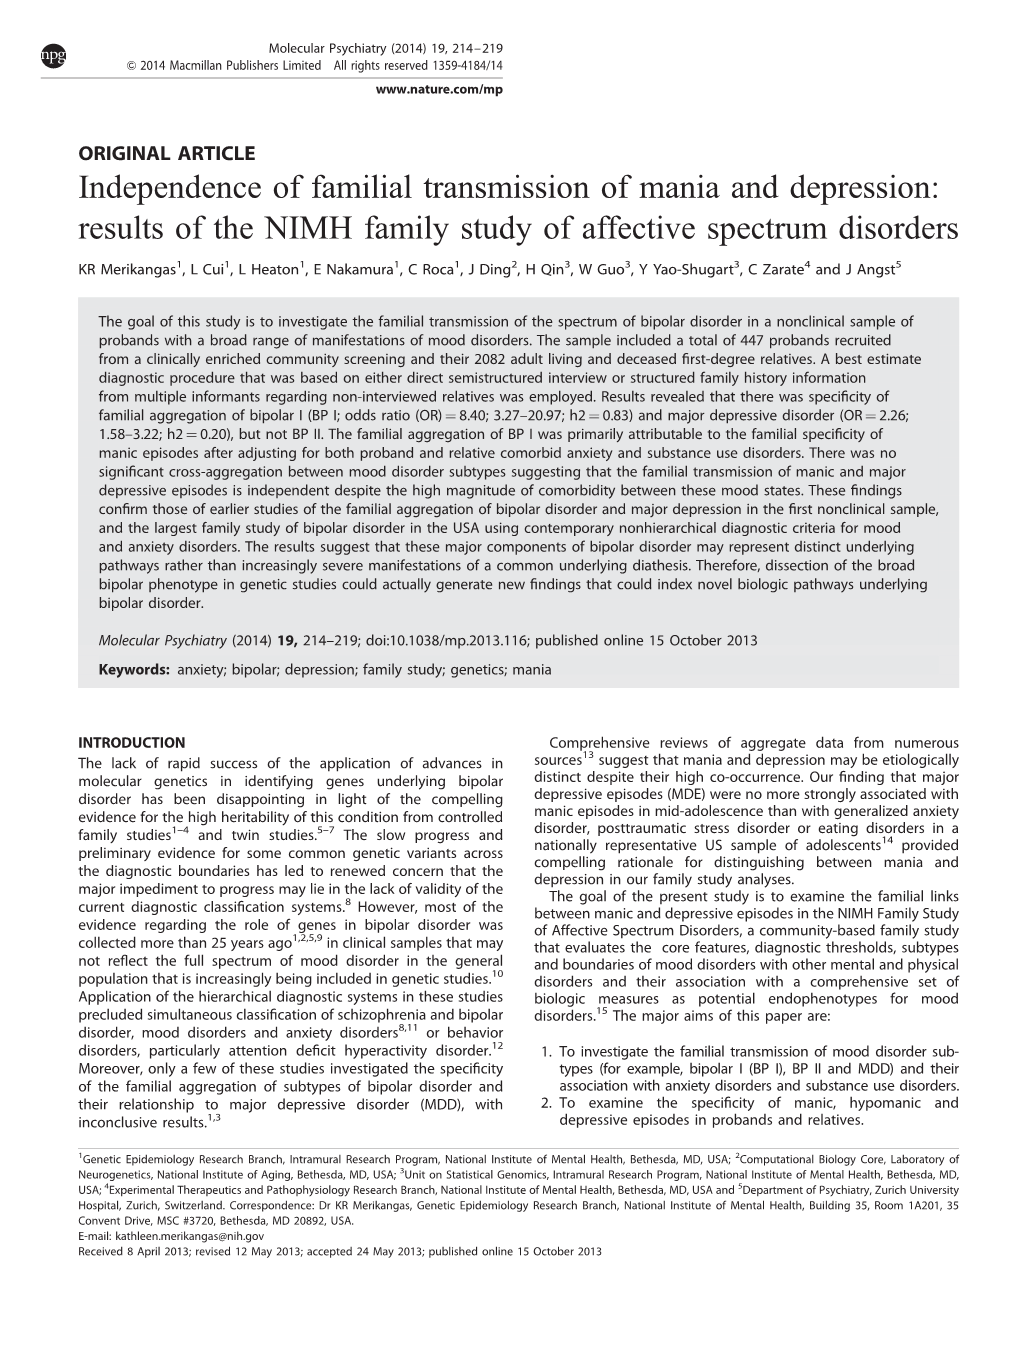 Independence of Familial Transmission of Mania and Depression: Results of the NIMH Family Study of Affective Spectrum Disorders